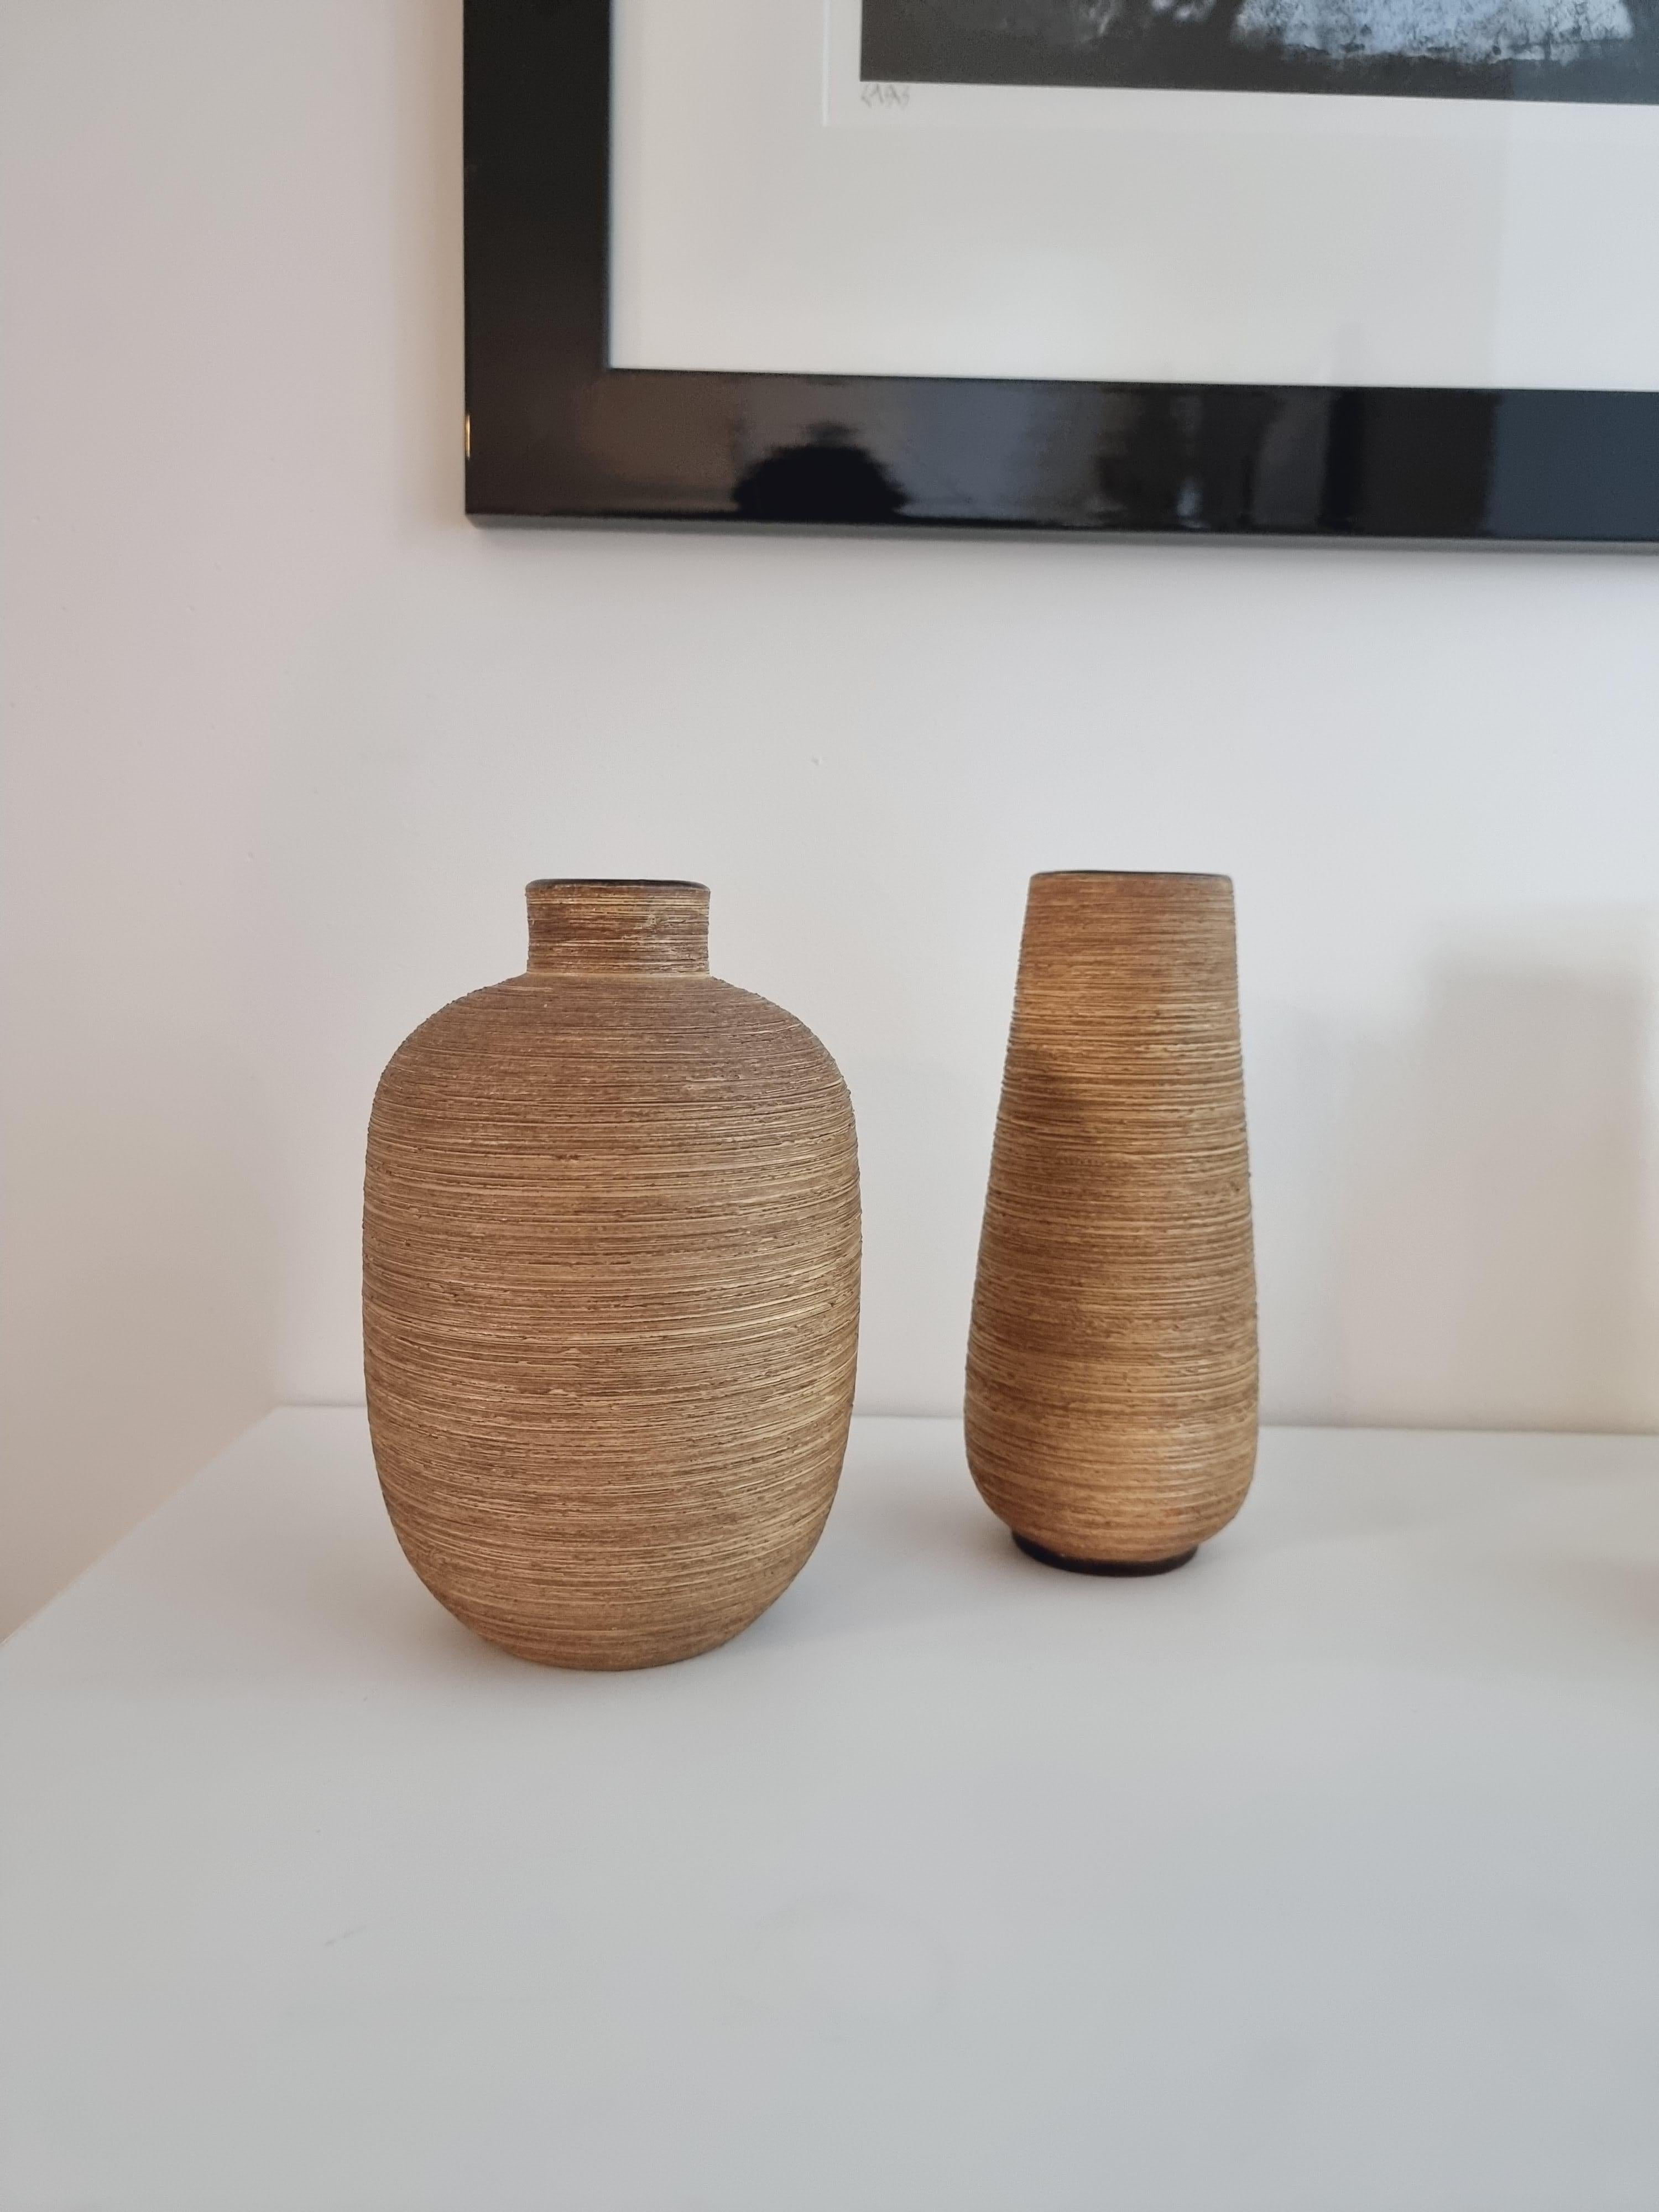 A set with two vases, with a warm organic structure. Signed Ekeby designed by Greta Runeborg, Sweden mid-1900s.

Smaller signs of wear, one minimal/small dent/color loss on one vase.

Greta Runeborg-Tell (1911-1989), swedish artist. She studied